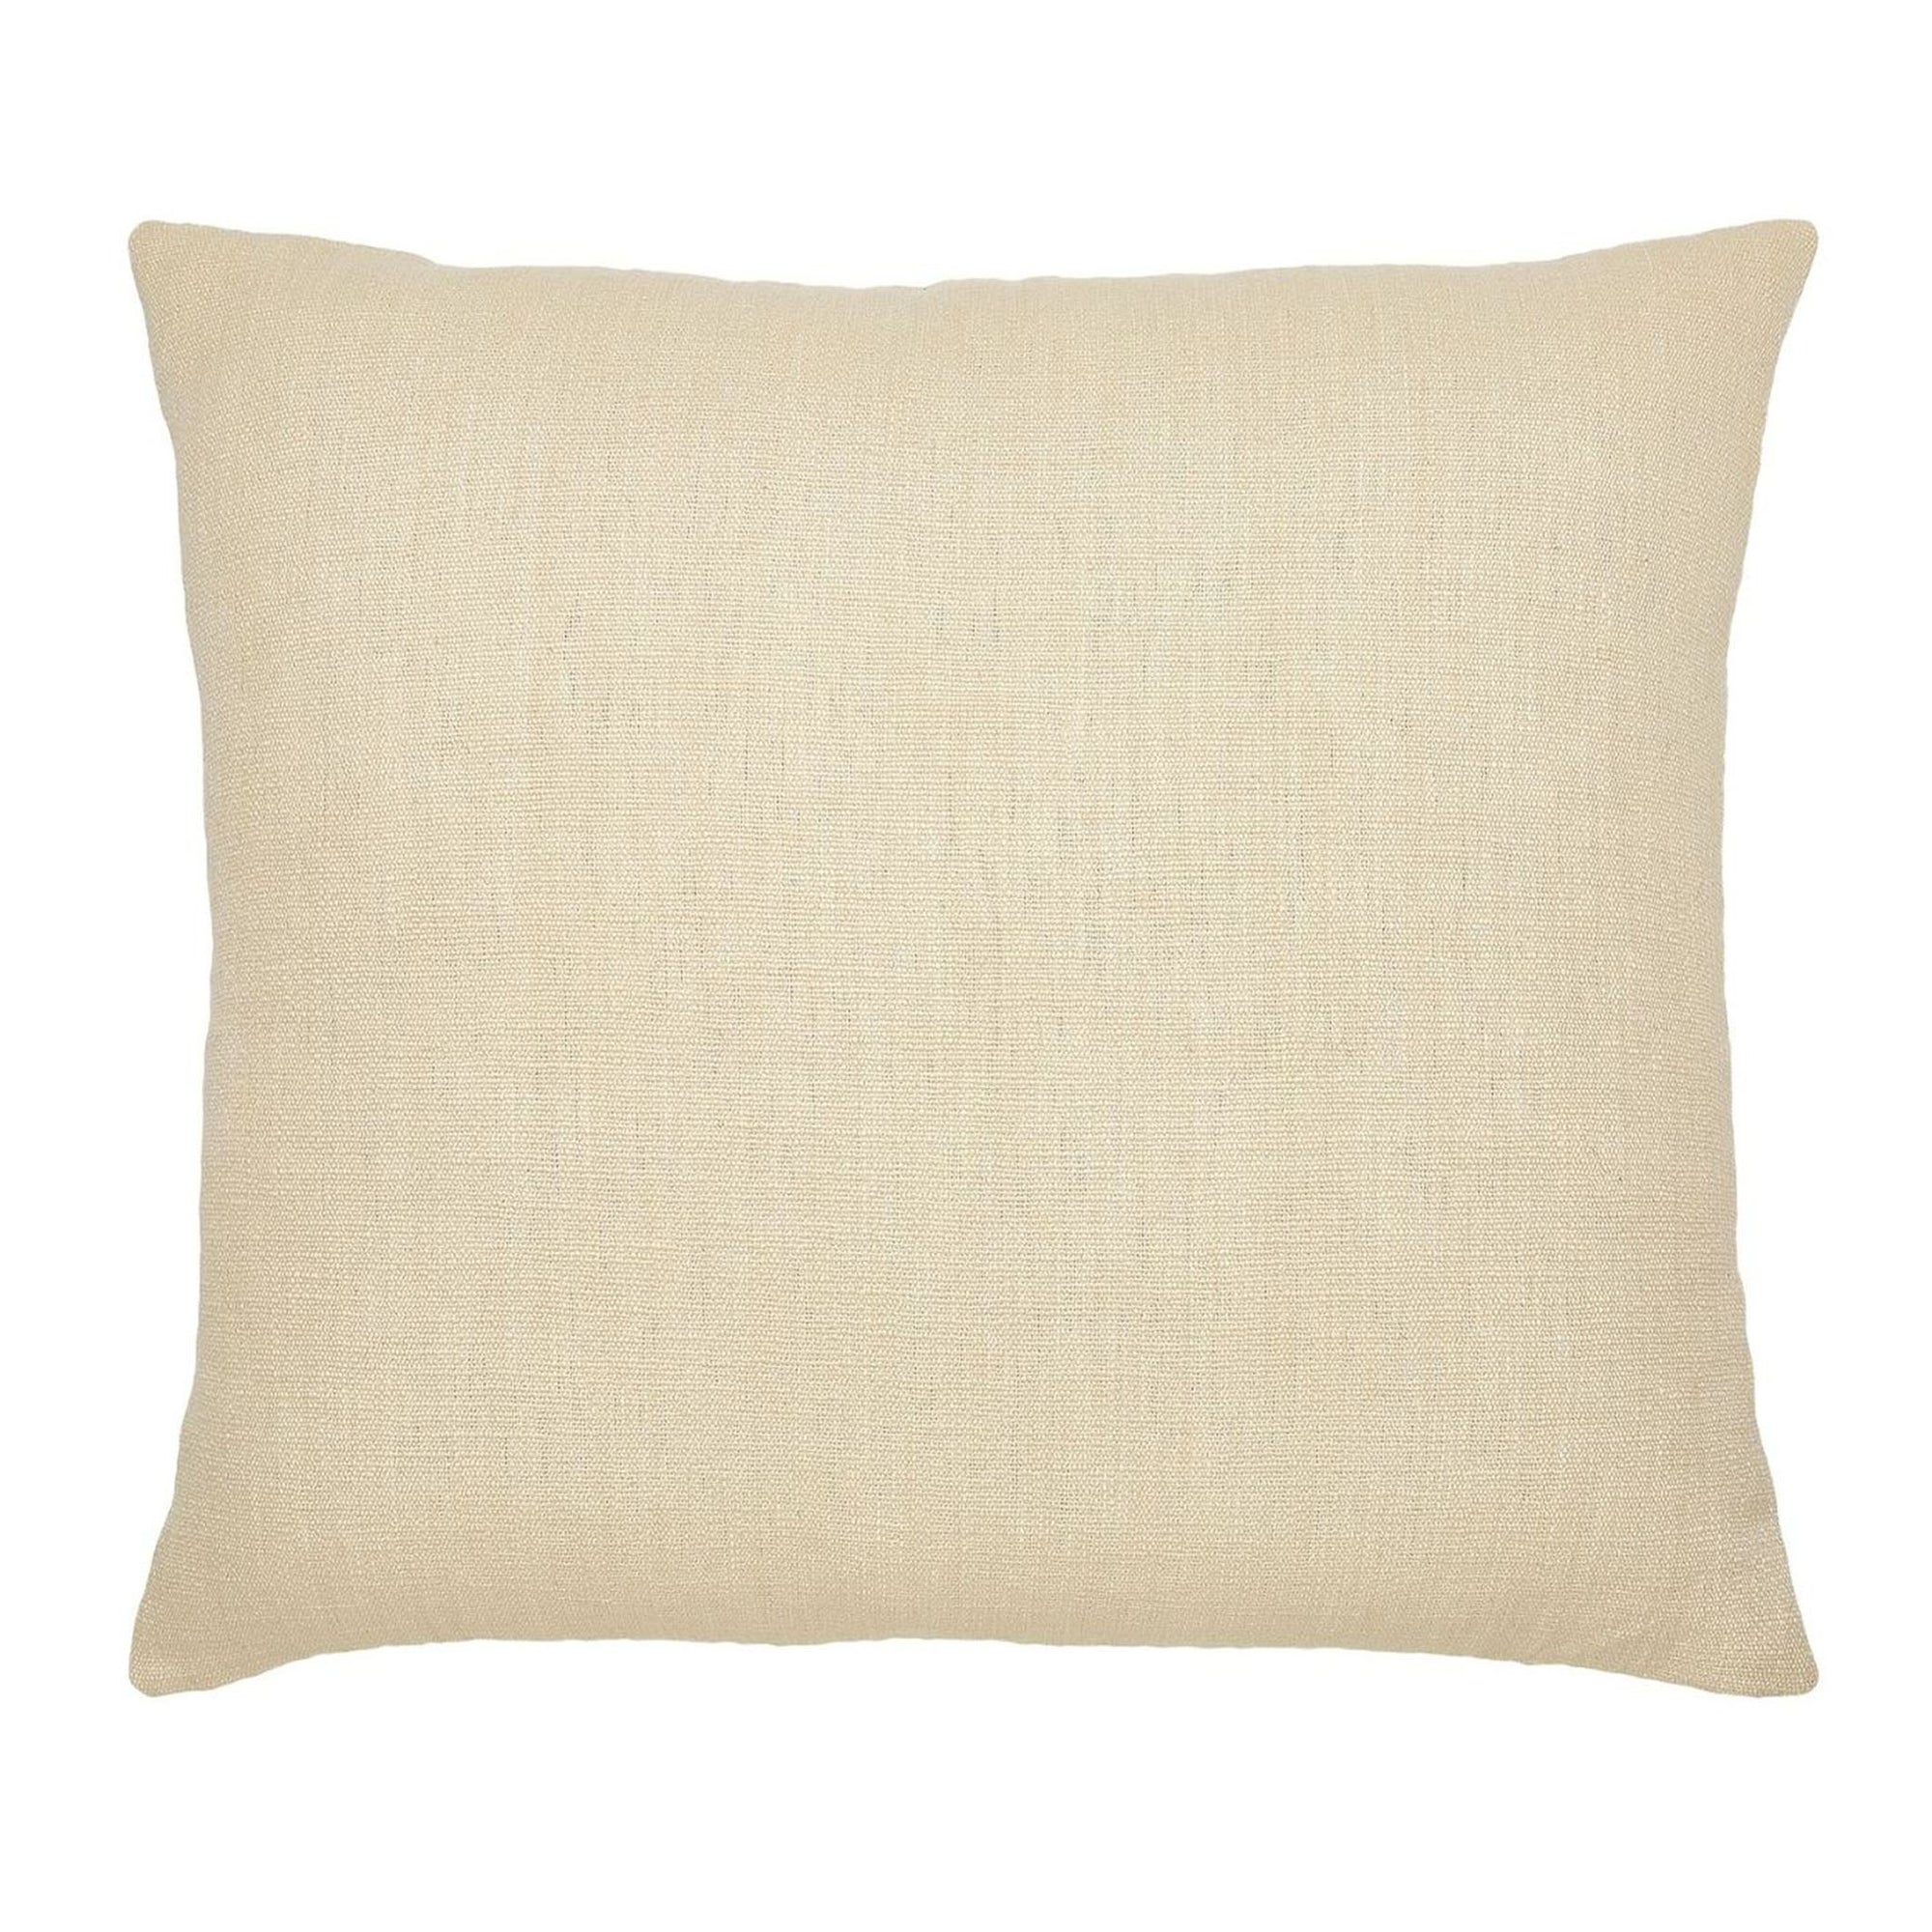 Aamil Sand King Euro Pillow Cover